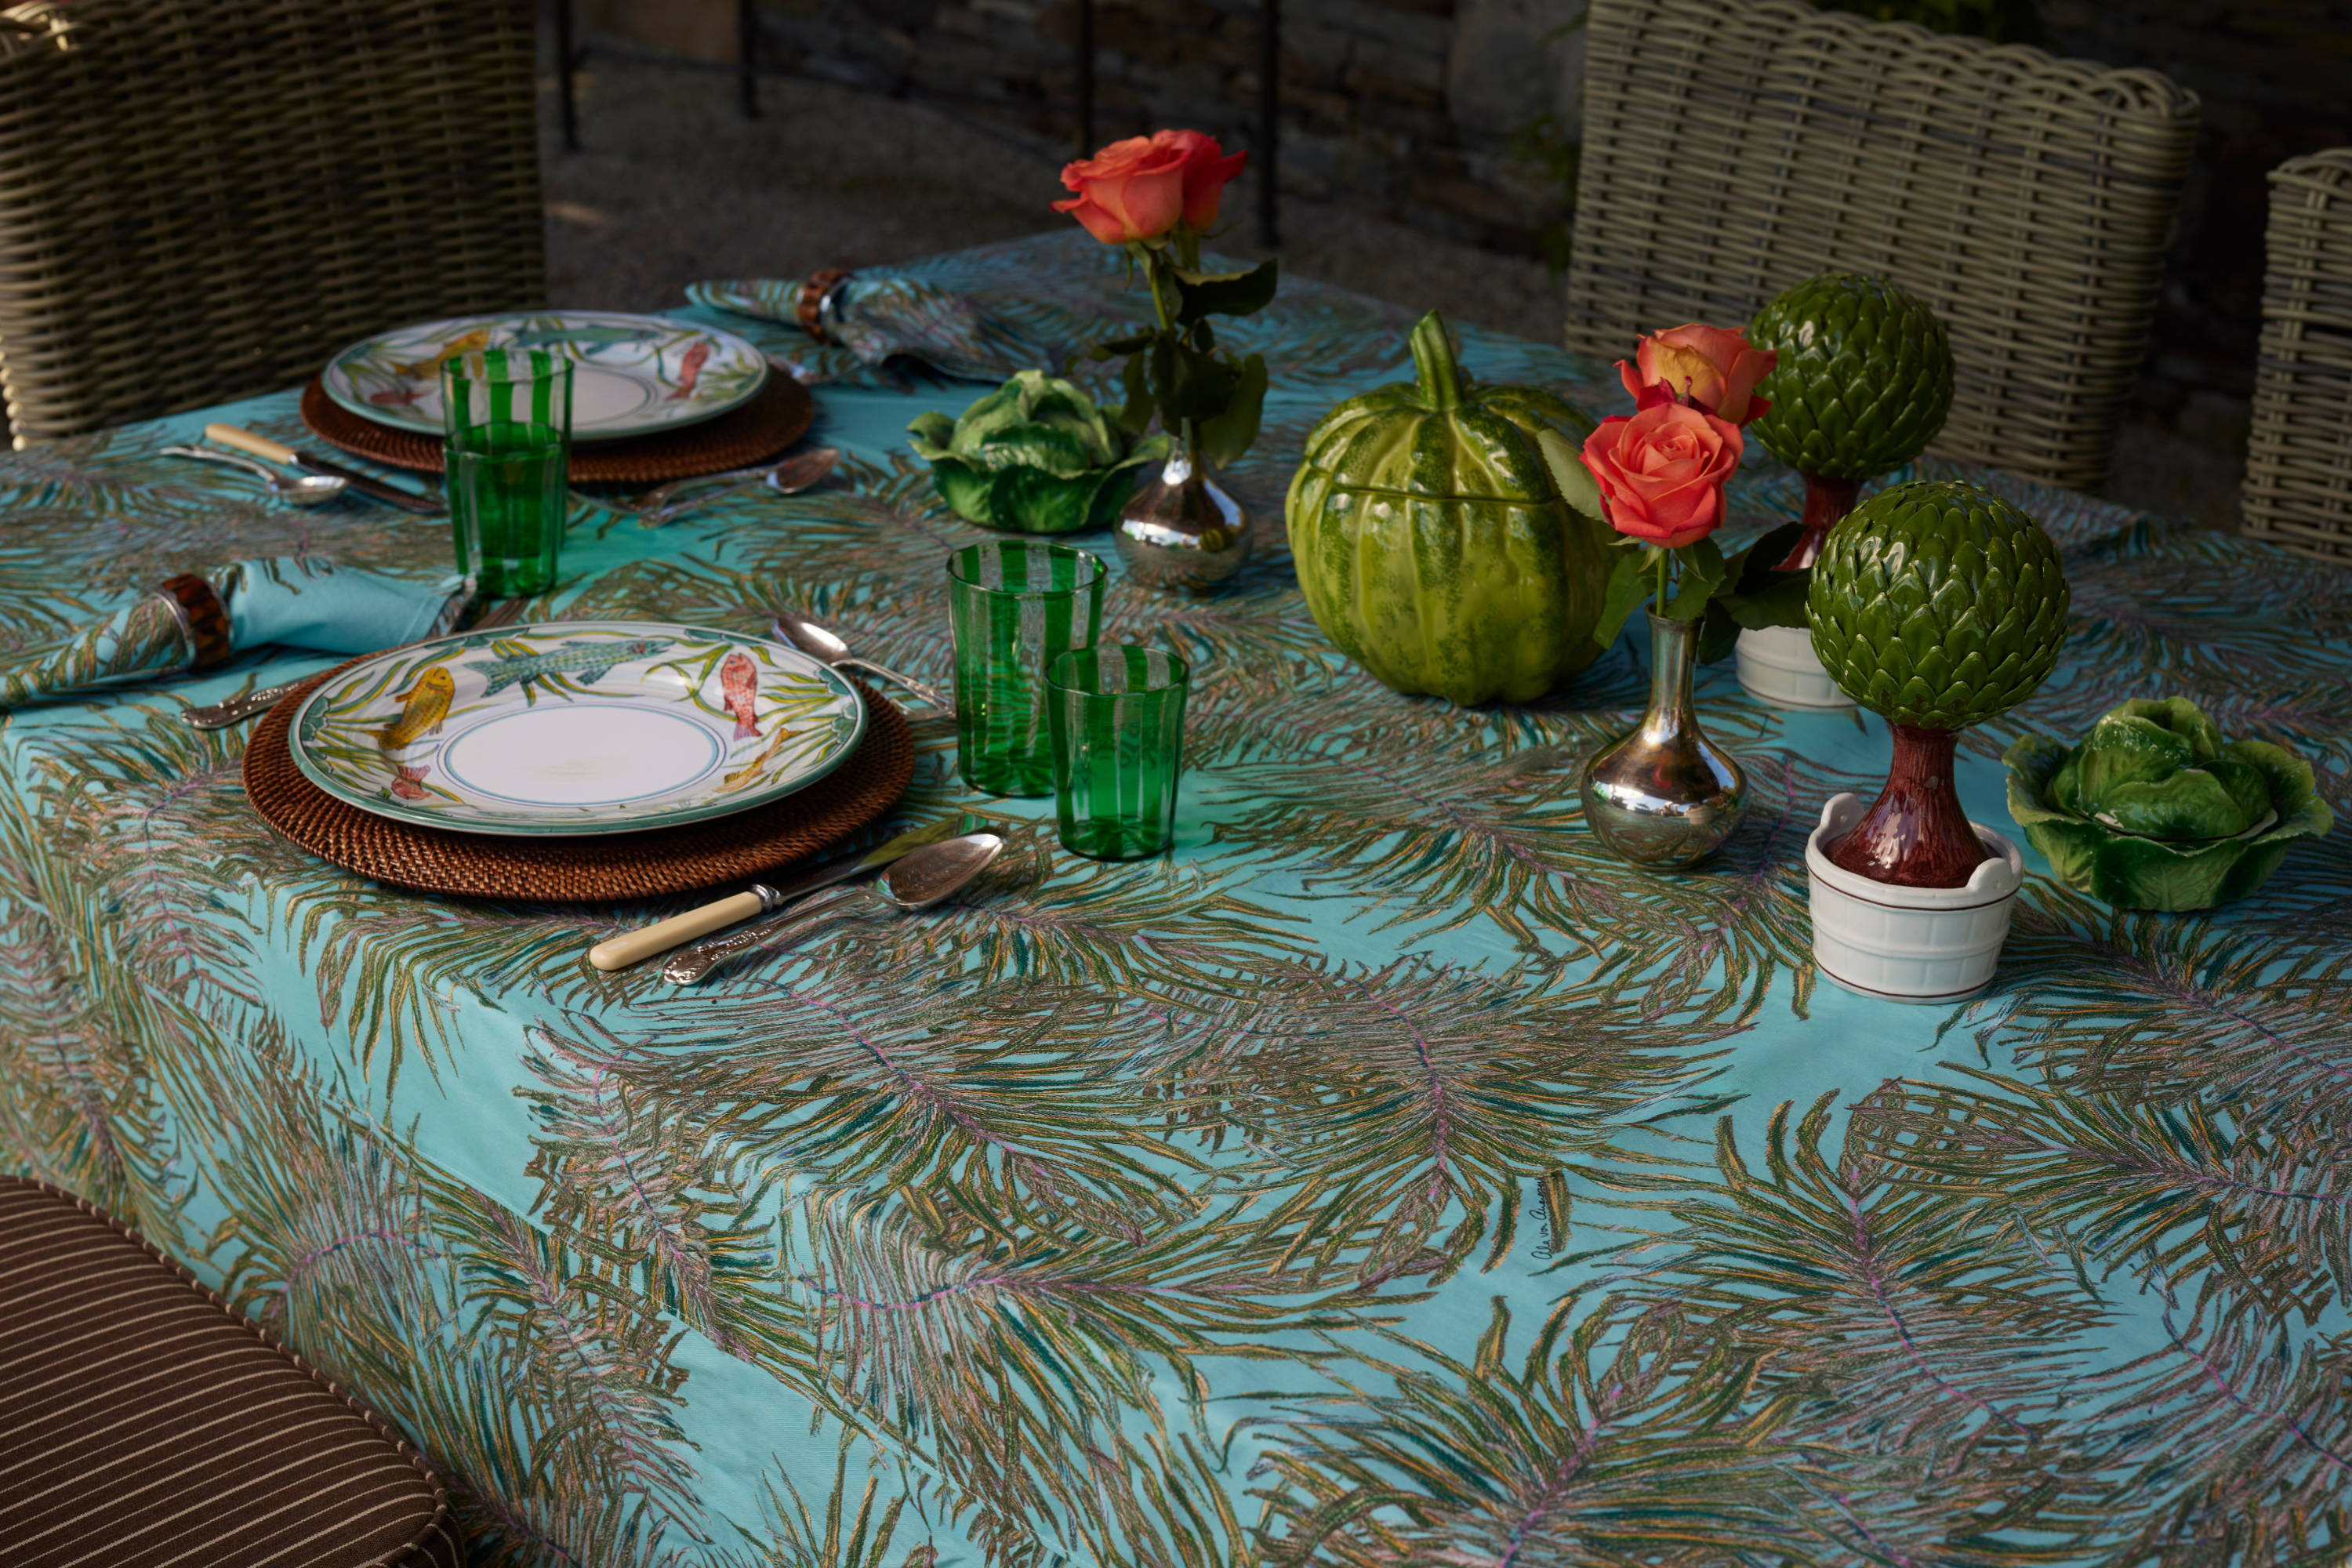 Green fern palm leaf printed cotton table cloth with matching napkins by Ala von Auersperg